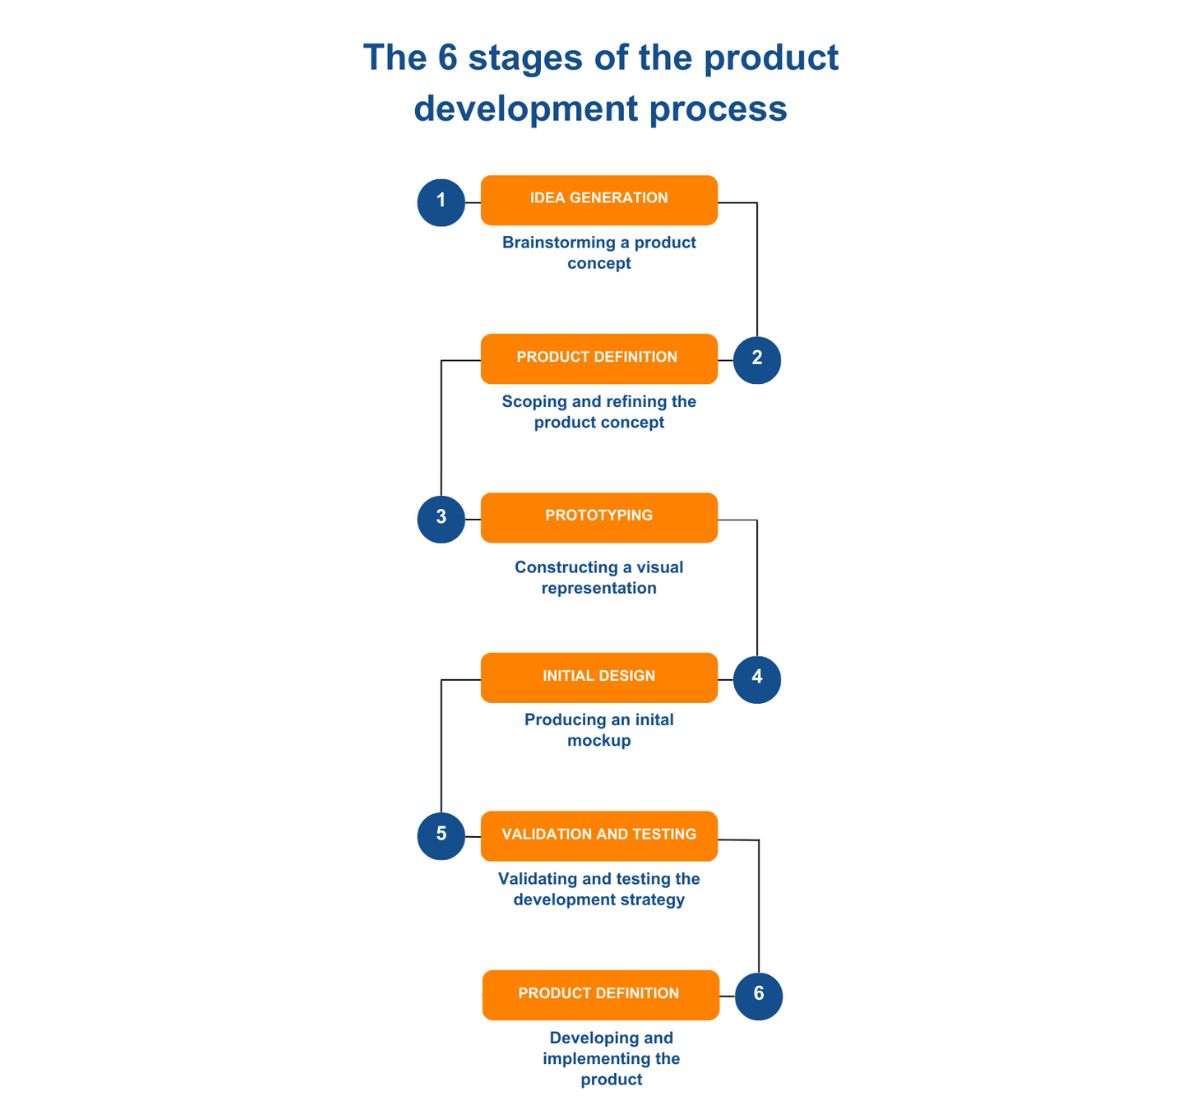 Packaging design is usually the last stage of product development process (after stage 5), however Nefab encourages its customers to take into consideration packaging design as soon as stage 2 (Product definition). This way you can optimize packaging performance, improve the product, and generate environmental and material savings.